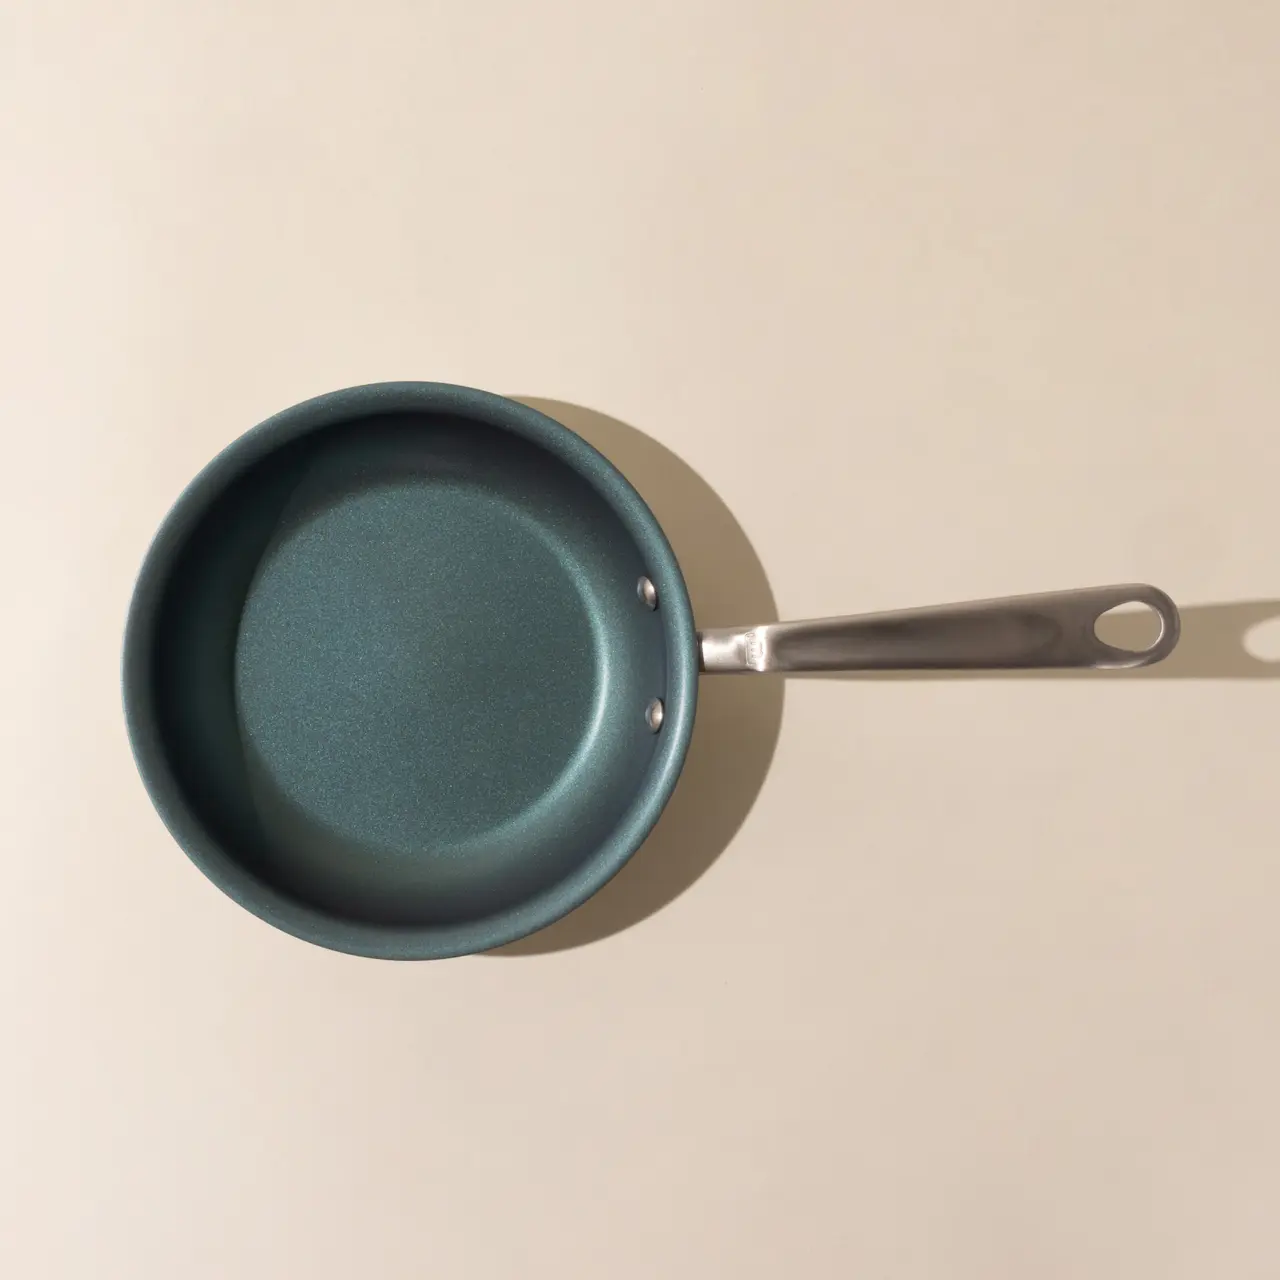 Non-stick frying pan with a silver handle set against a simple, neutral background.